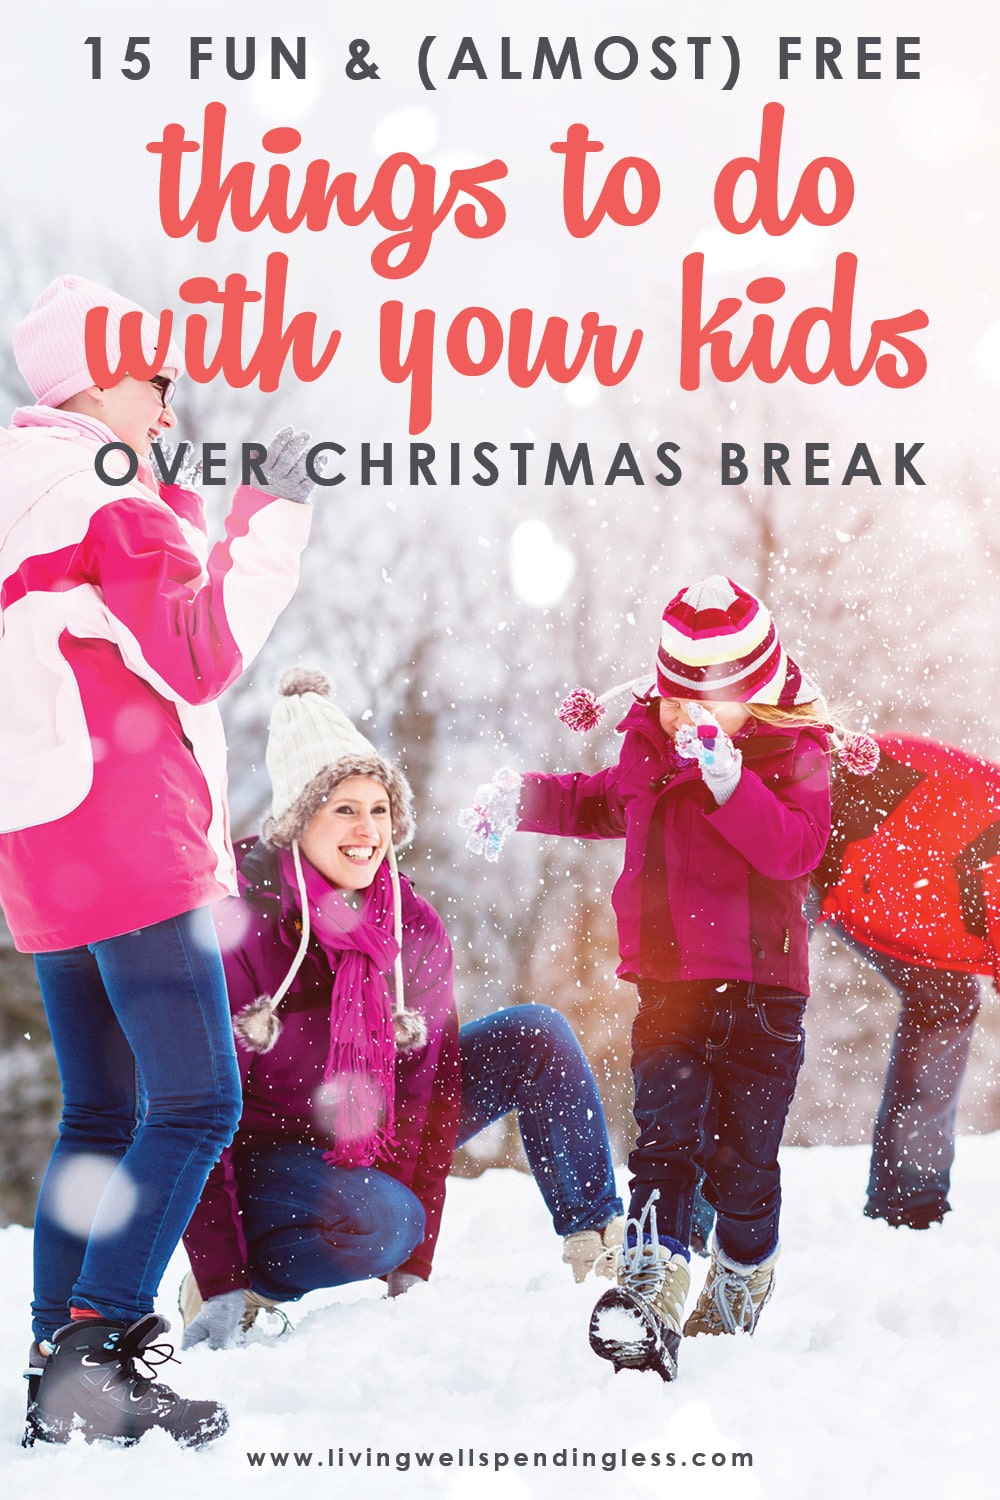 Wondering what to do with your kids over winter and Christmas break? Here are 15 fun things to do with your kids over winter break (or any time). #holidays #familyactivities #parenting #christmas #christmasbreak #noschool #funactivities #freeactivities #cheapactivities